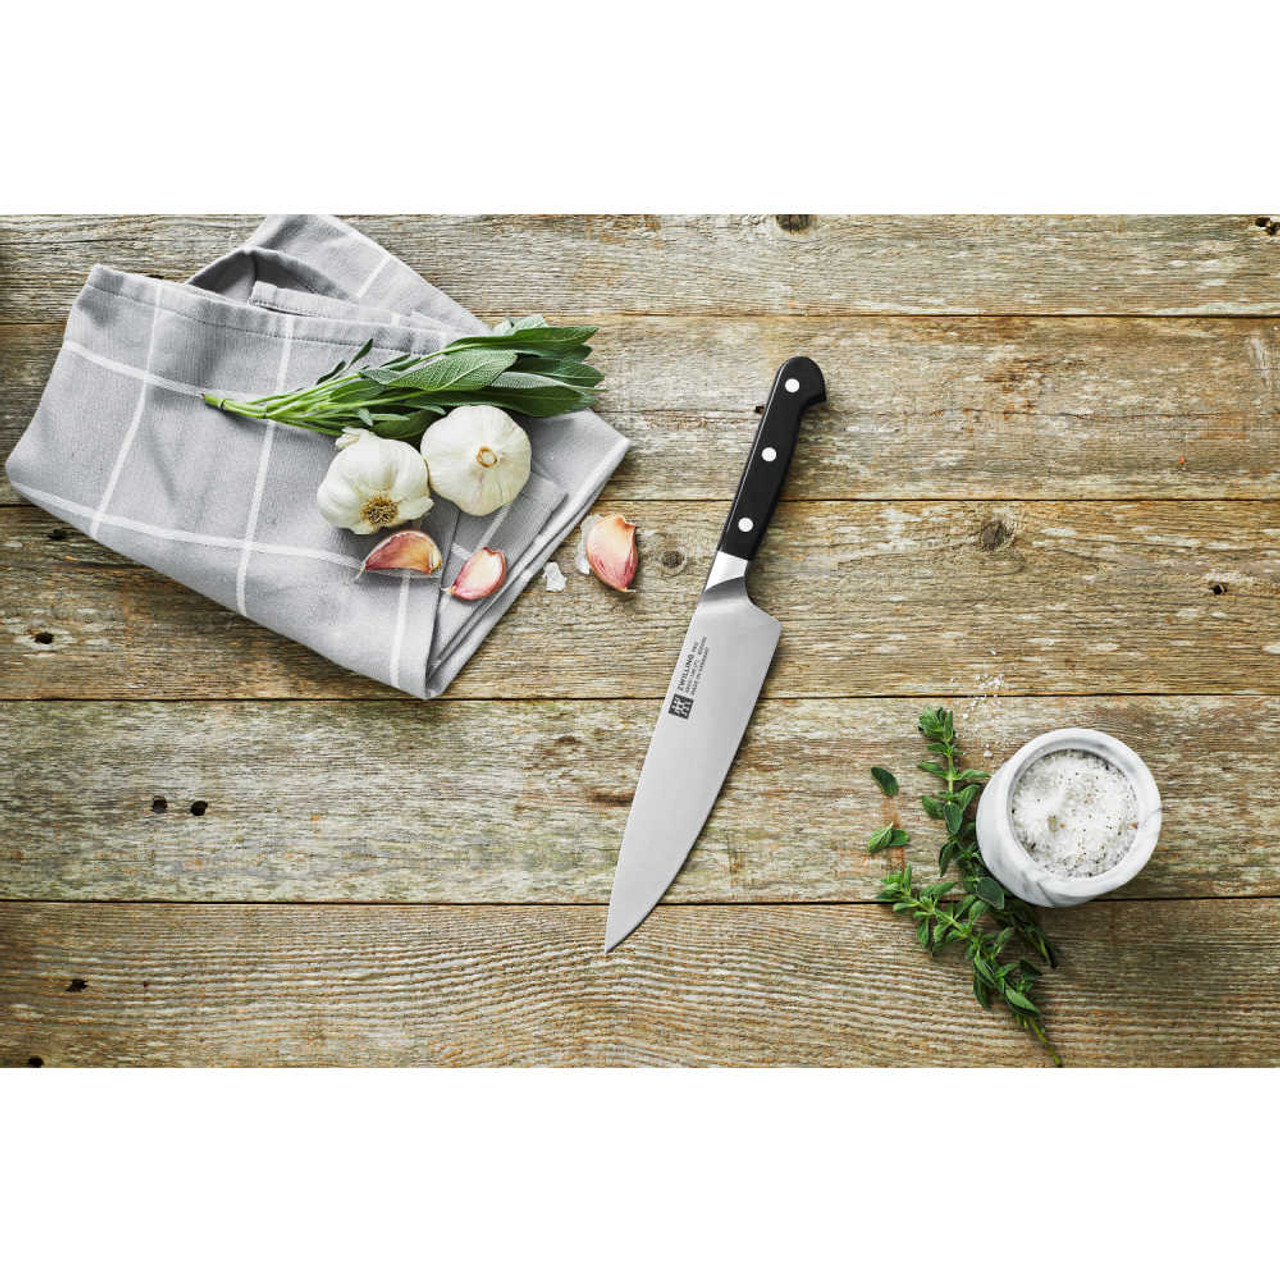 https://cdn11.bigcommerce.com/s-hccytny0od/images/stencil/1280x1280/products/4362/16981/Zwilling_Pro_Slim_Chefs_Knife_1__93868.1634252984.jpg?c=2?imbypass=on